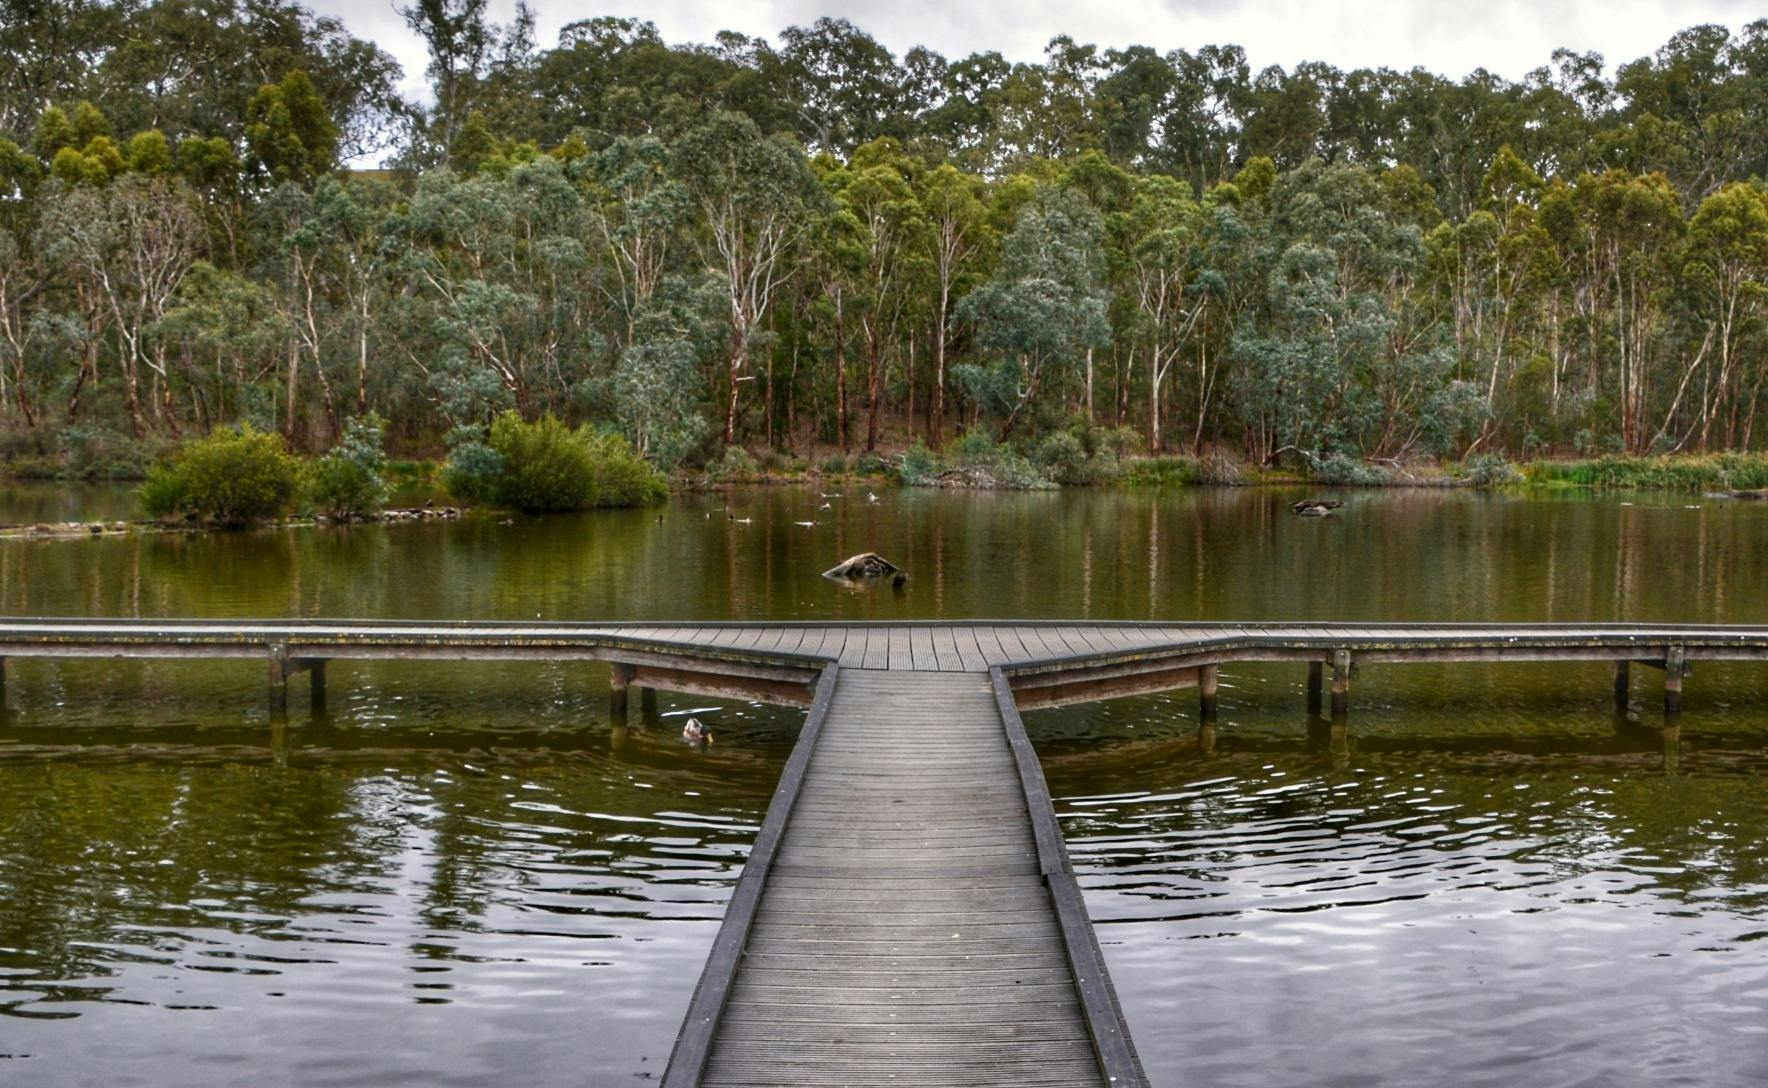 A wooden walkway leads out over a lake and a line of trees can be seen on the other side of the water.